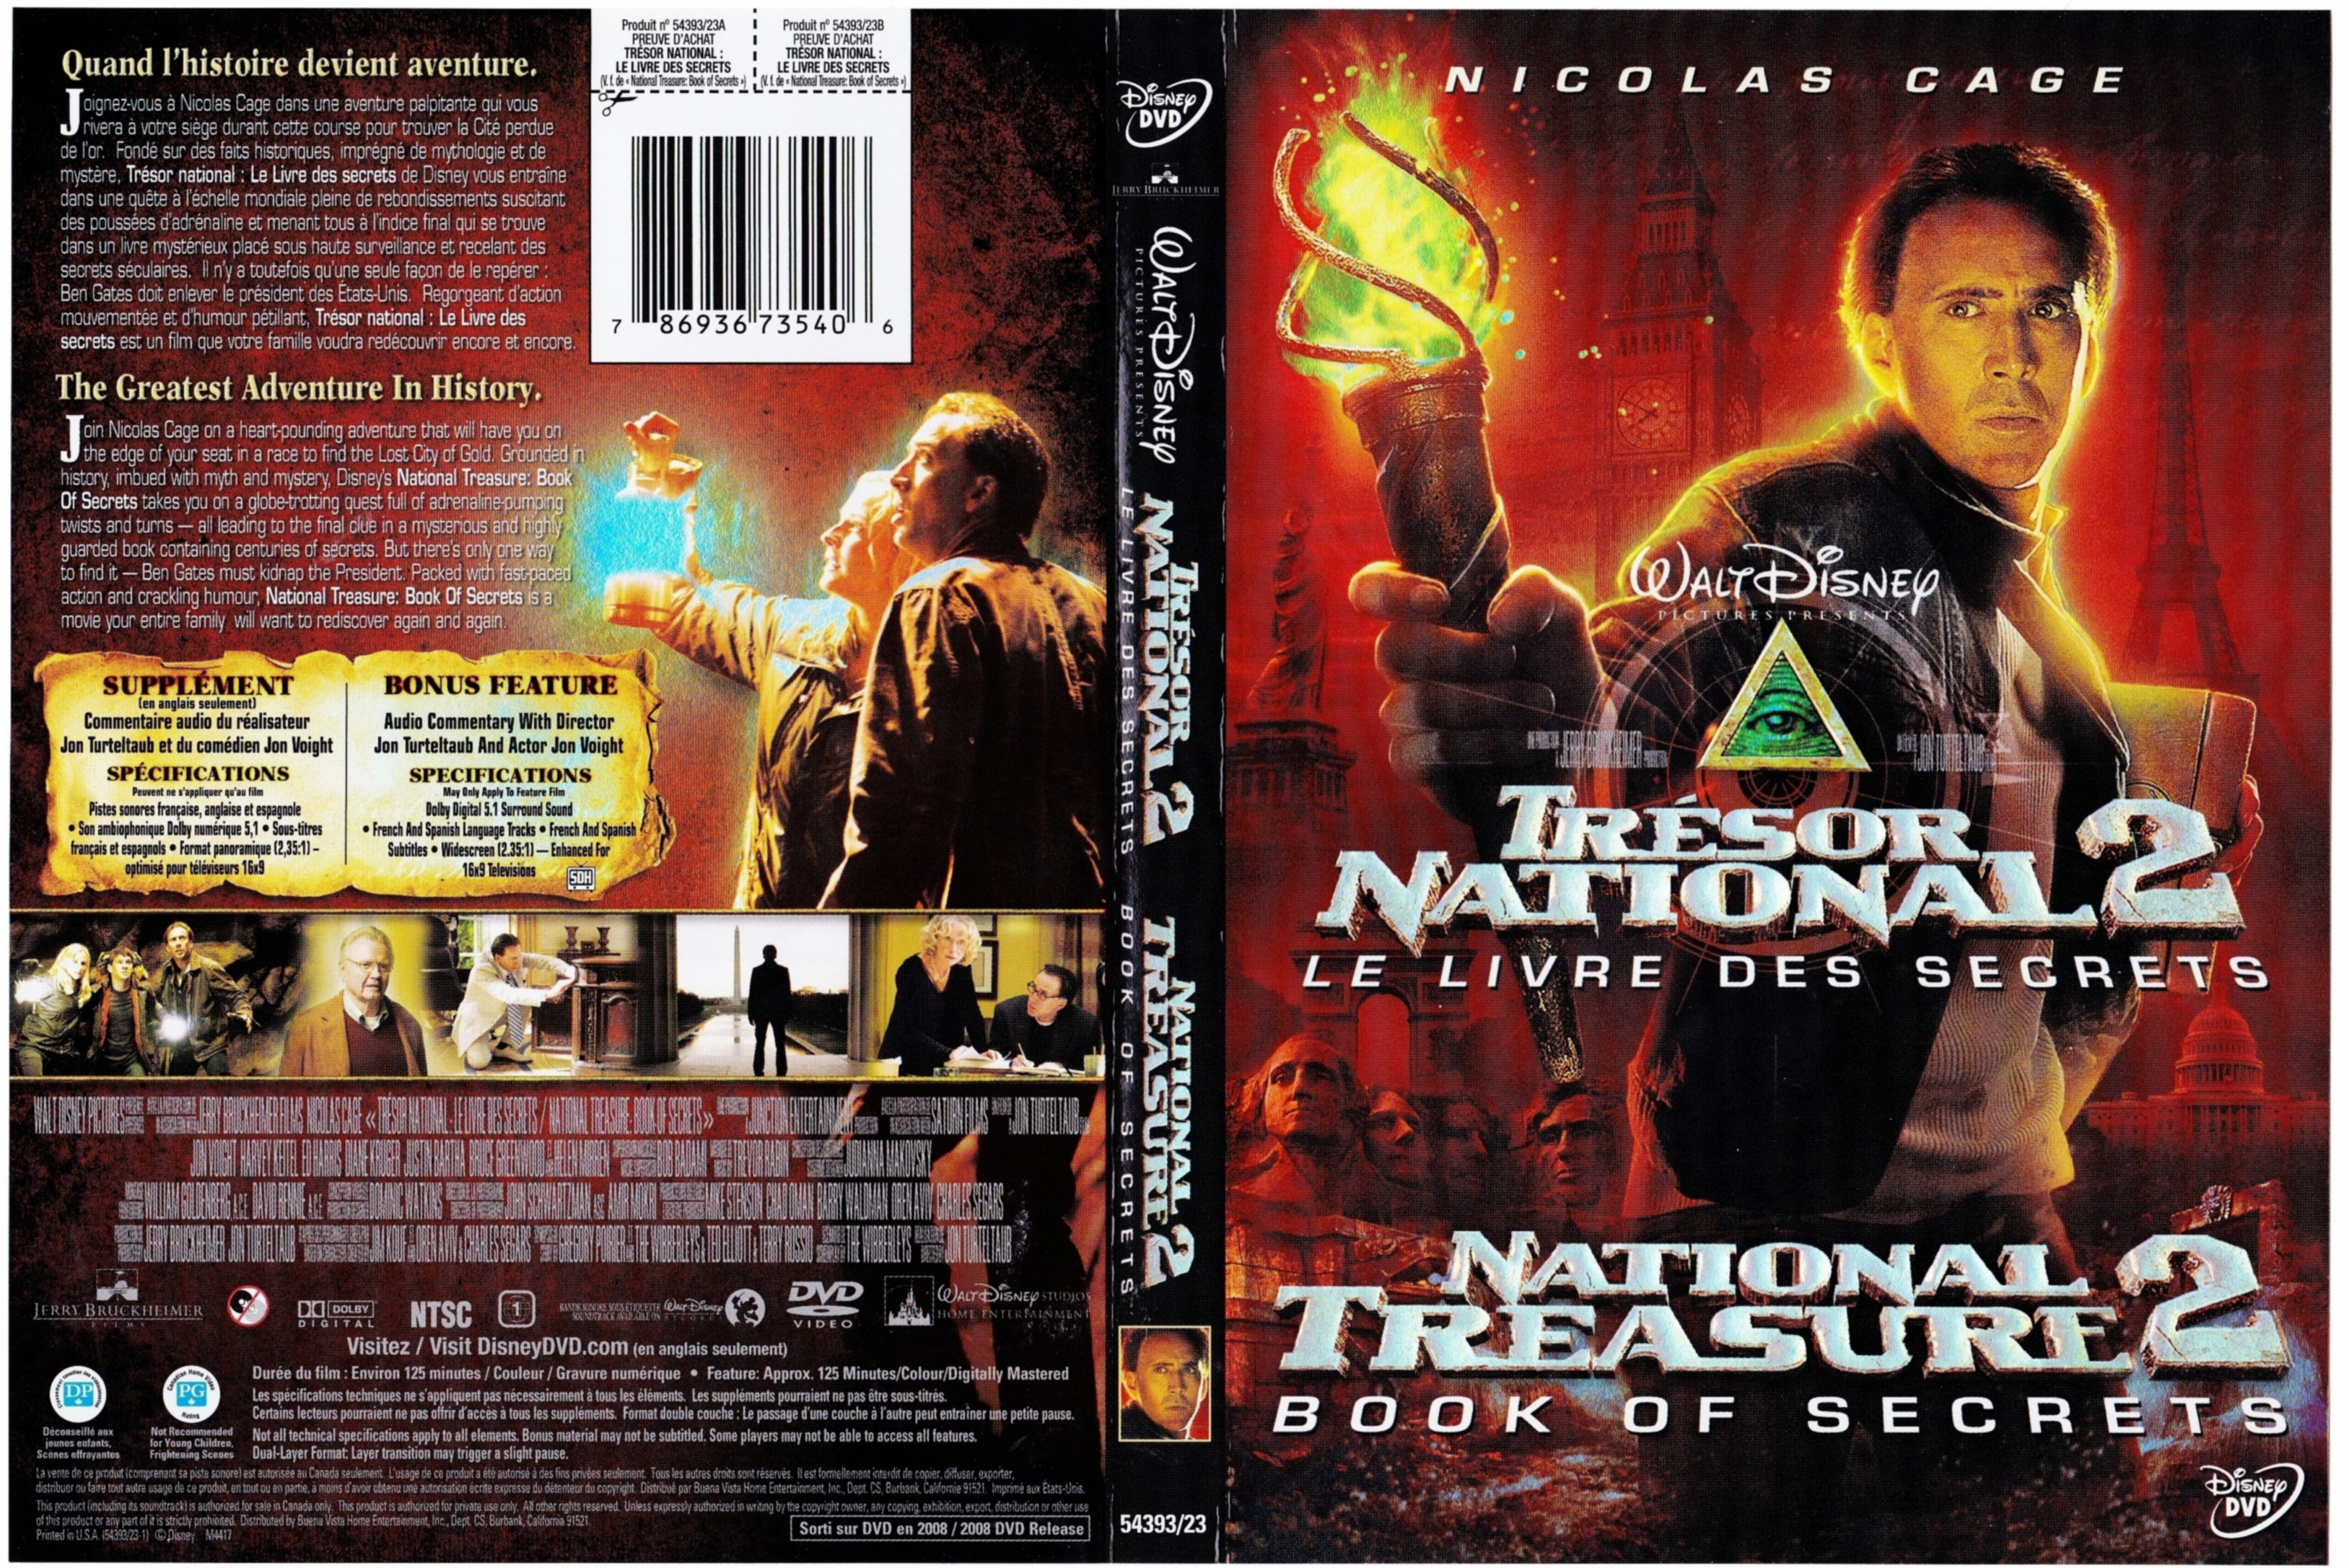 Jaquette DVD Trsor National 2 - National treasure 2 (Canadienne)